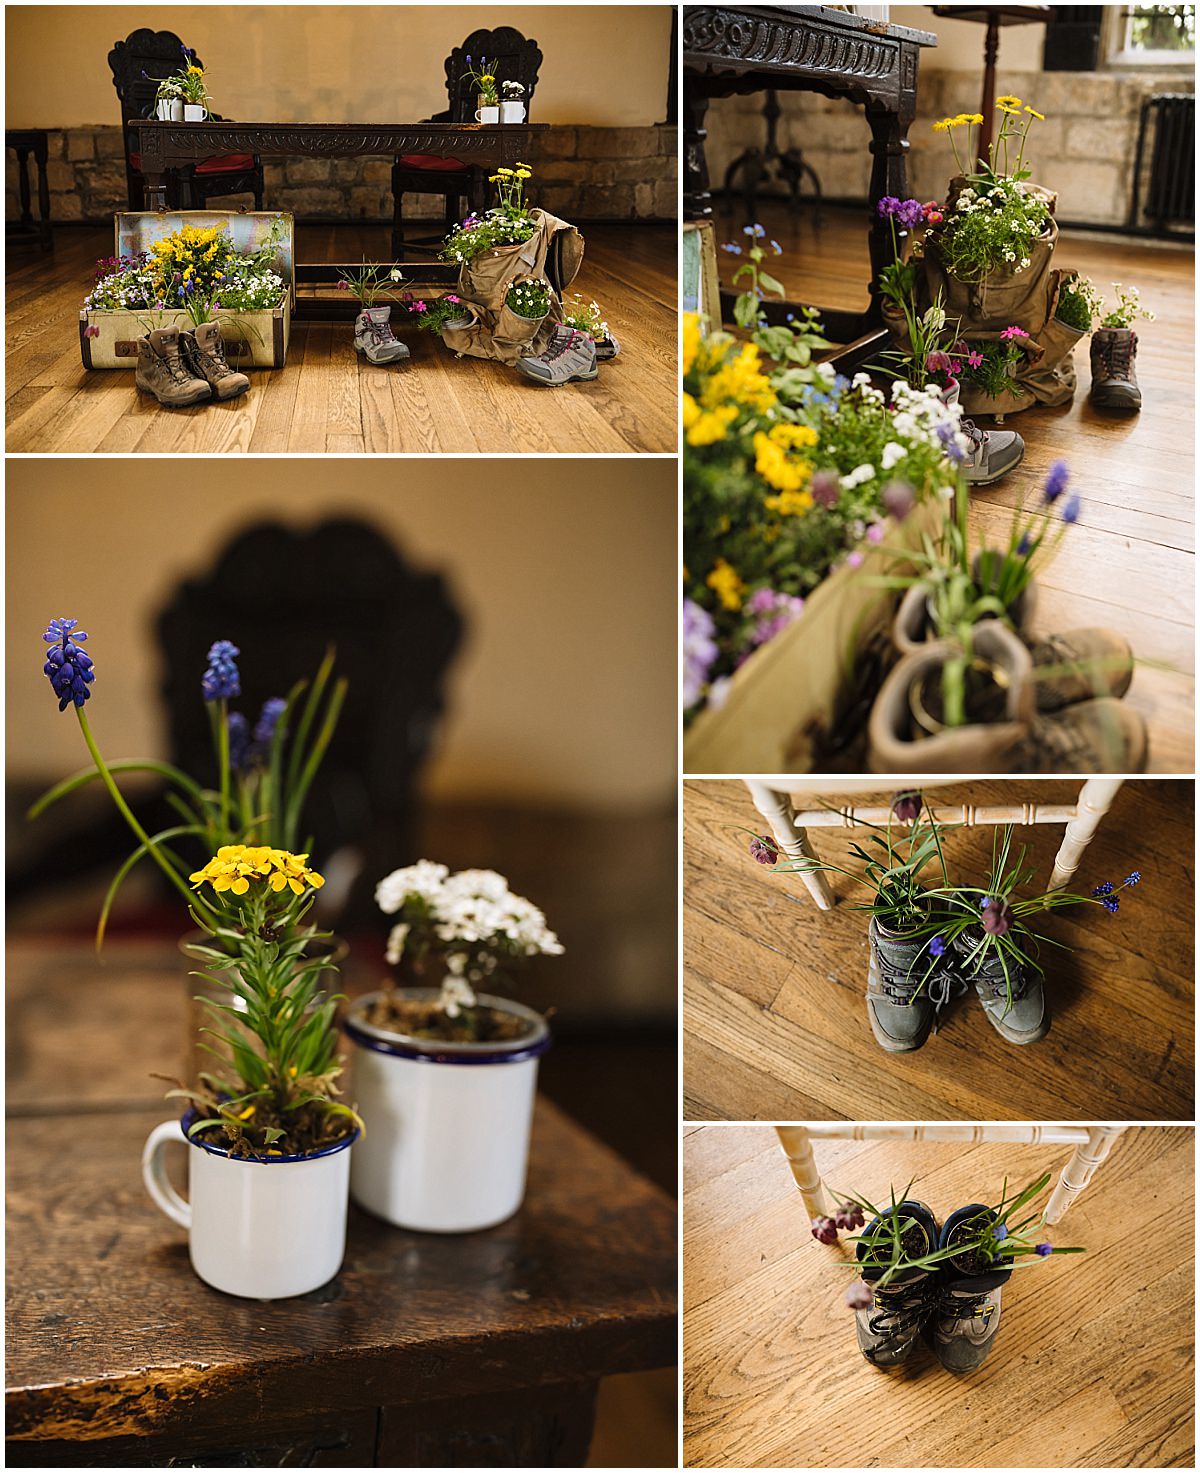 A collage of six images featuring rustic floral arrangements inside various unconventional containers such as boots, pots, and suitcases on a wooden floor inside a room with a bench and fireplace.